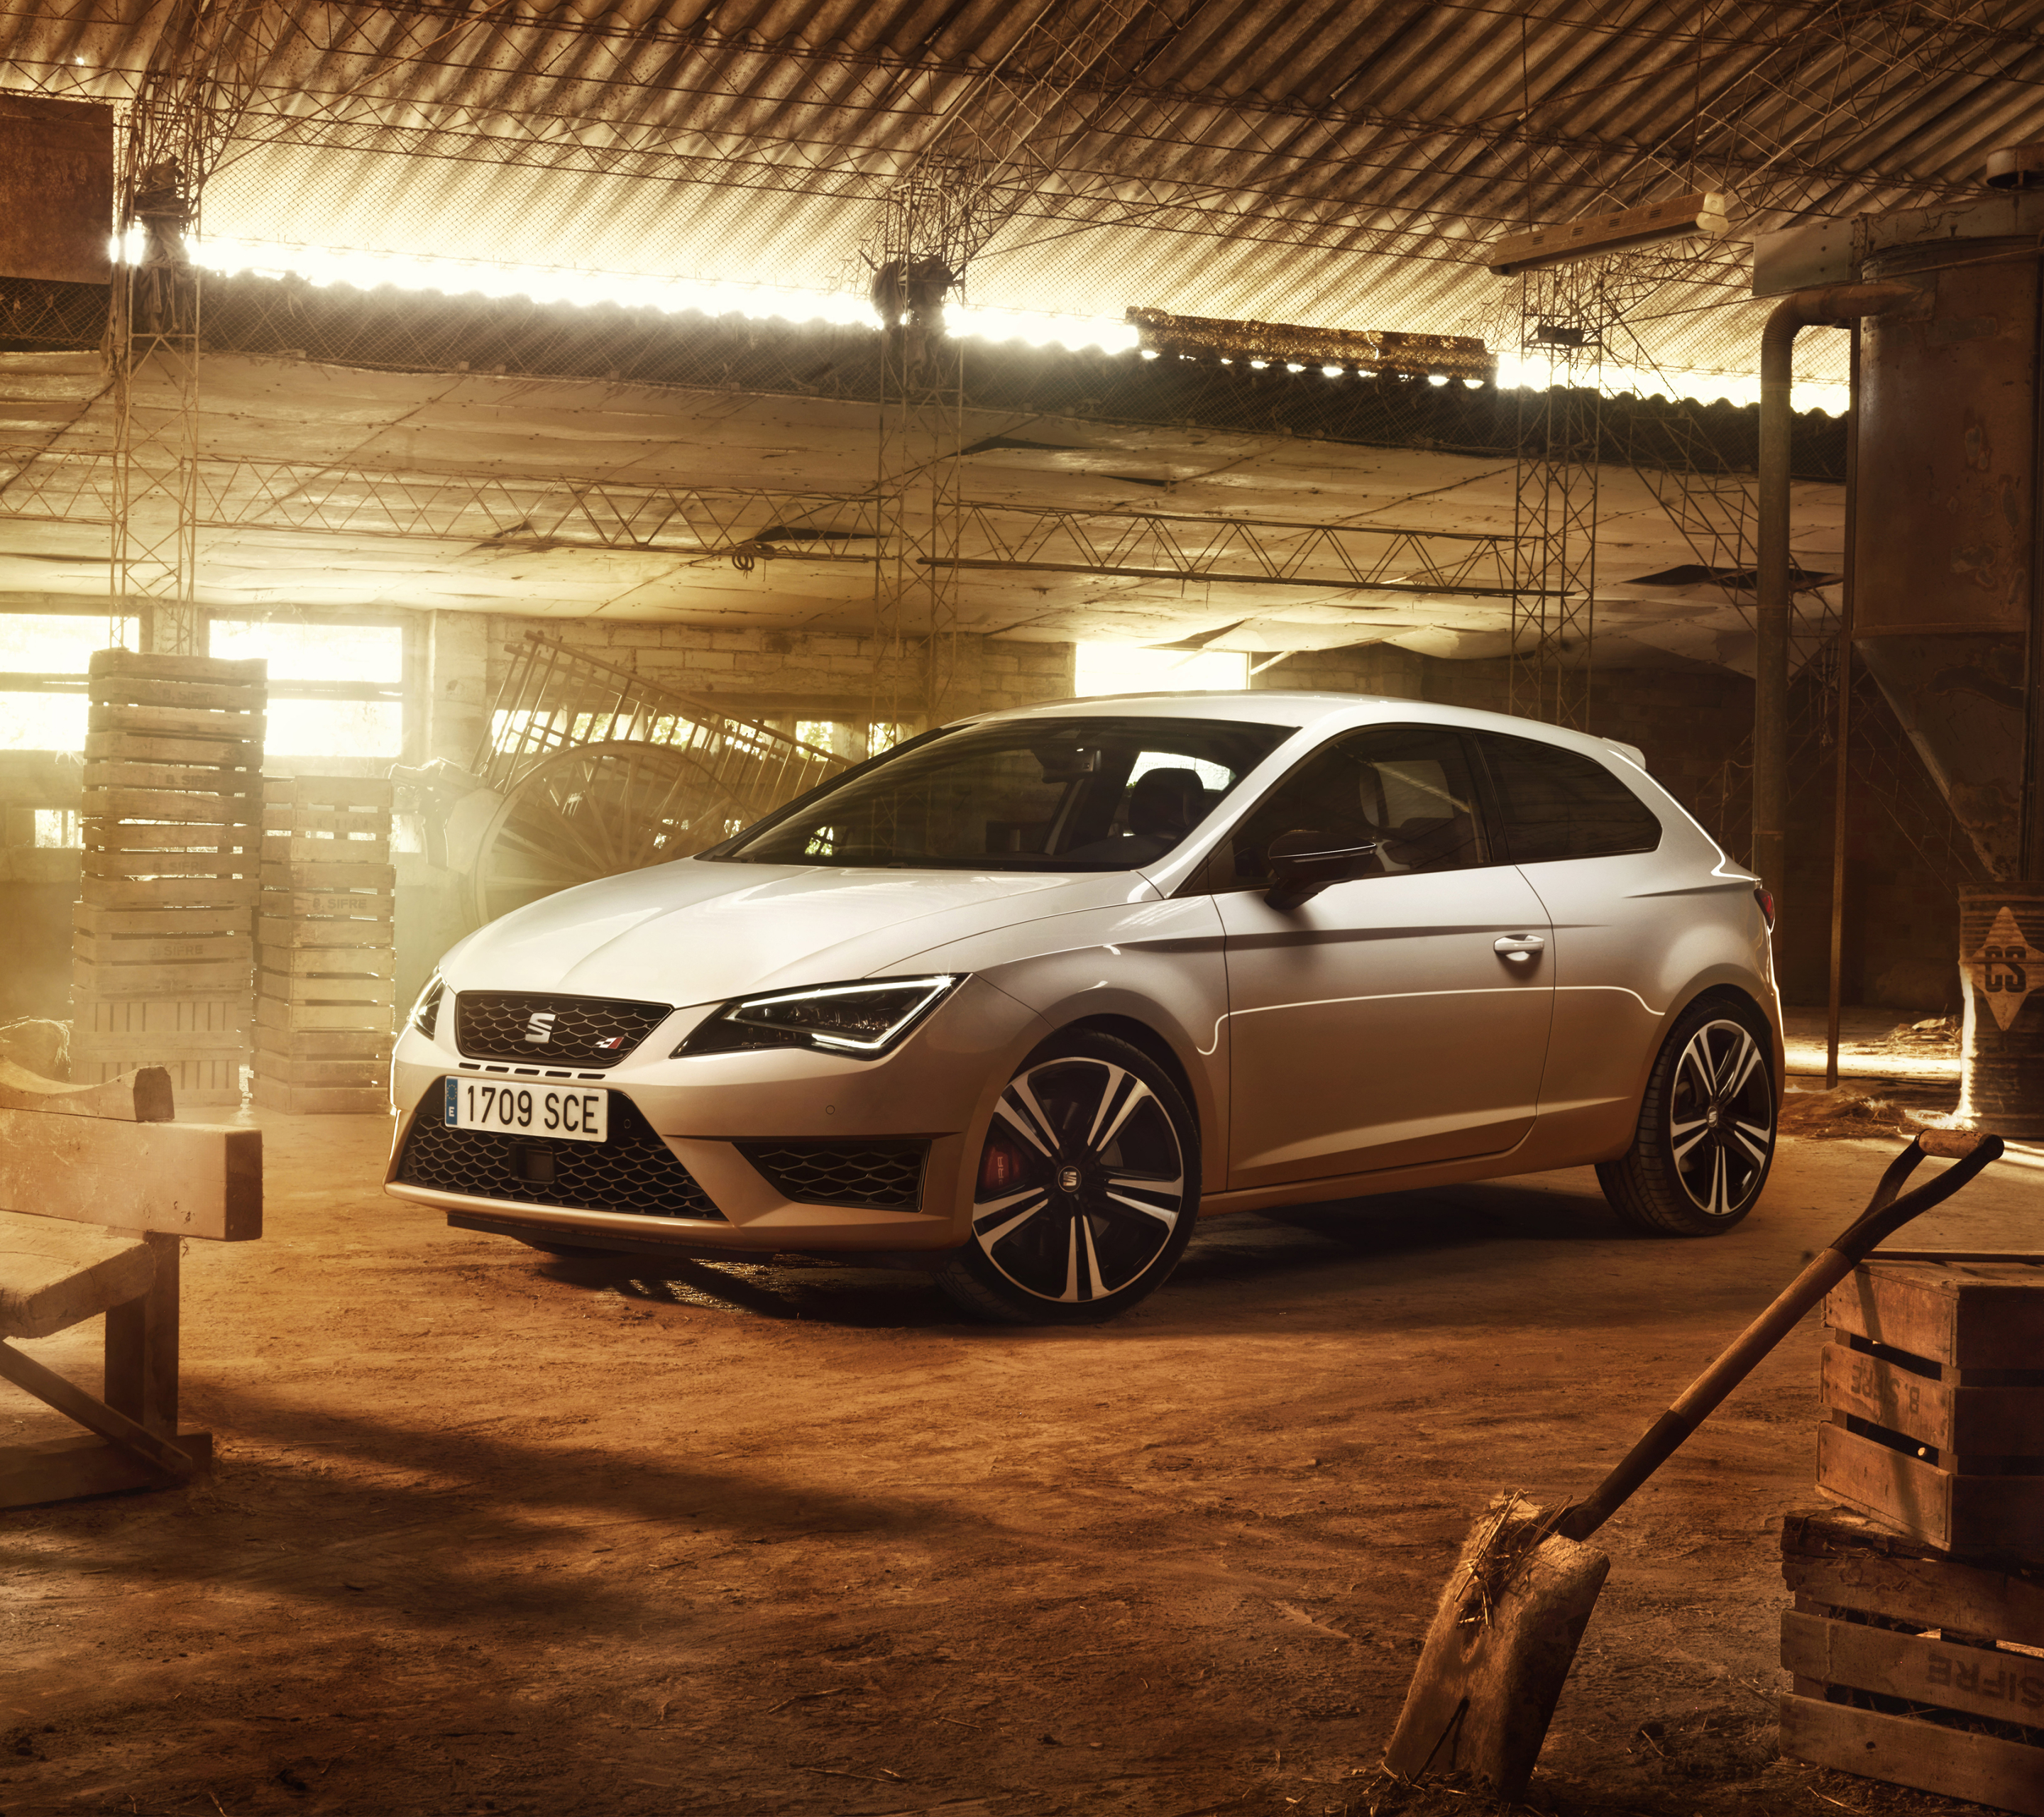 Download wallpapers Seat Leon, tuning, stance, parking, tunned Leon, Seat  for desktop free. Pictures for desktop free